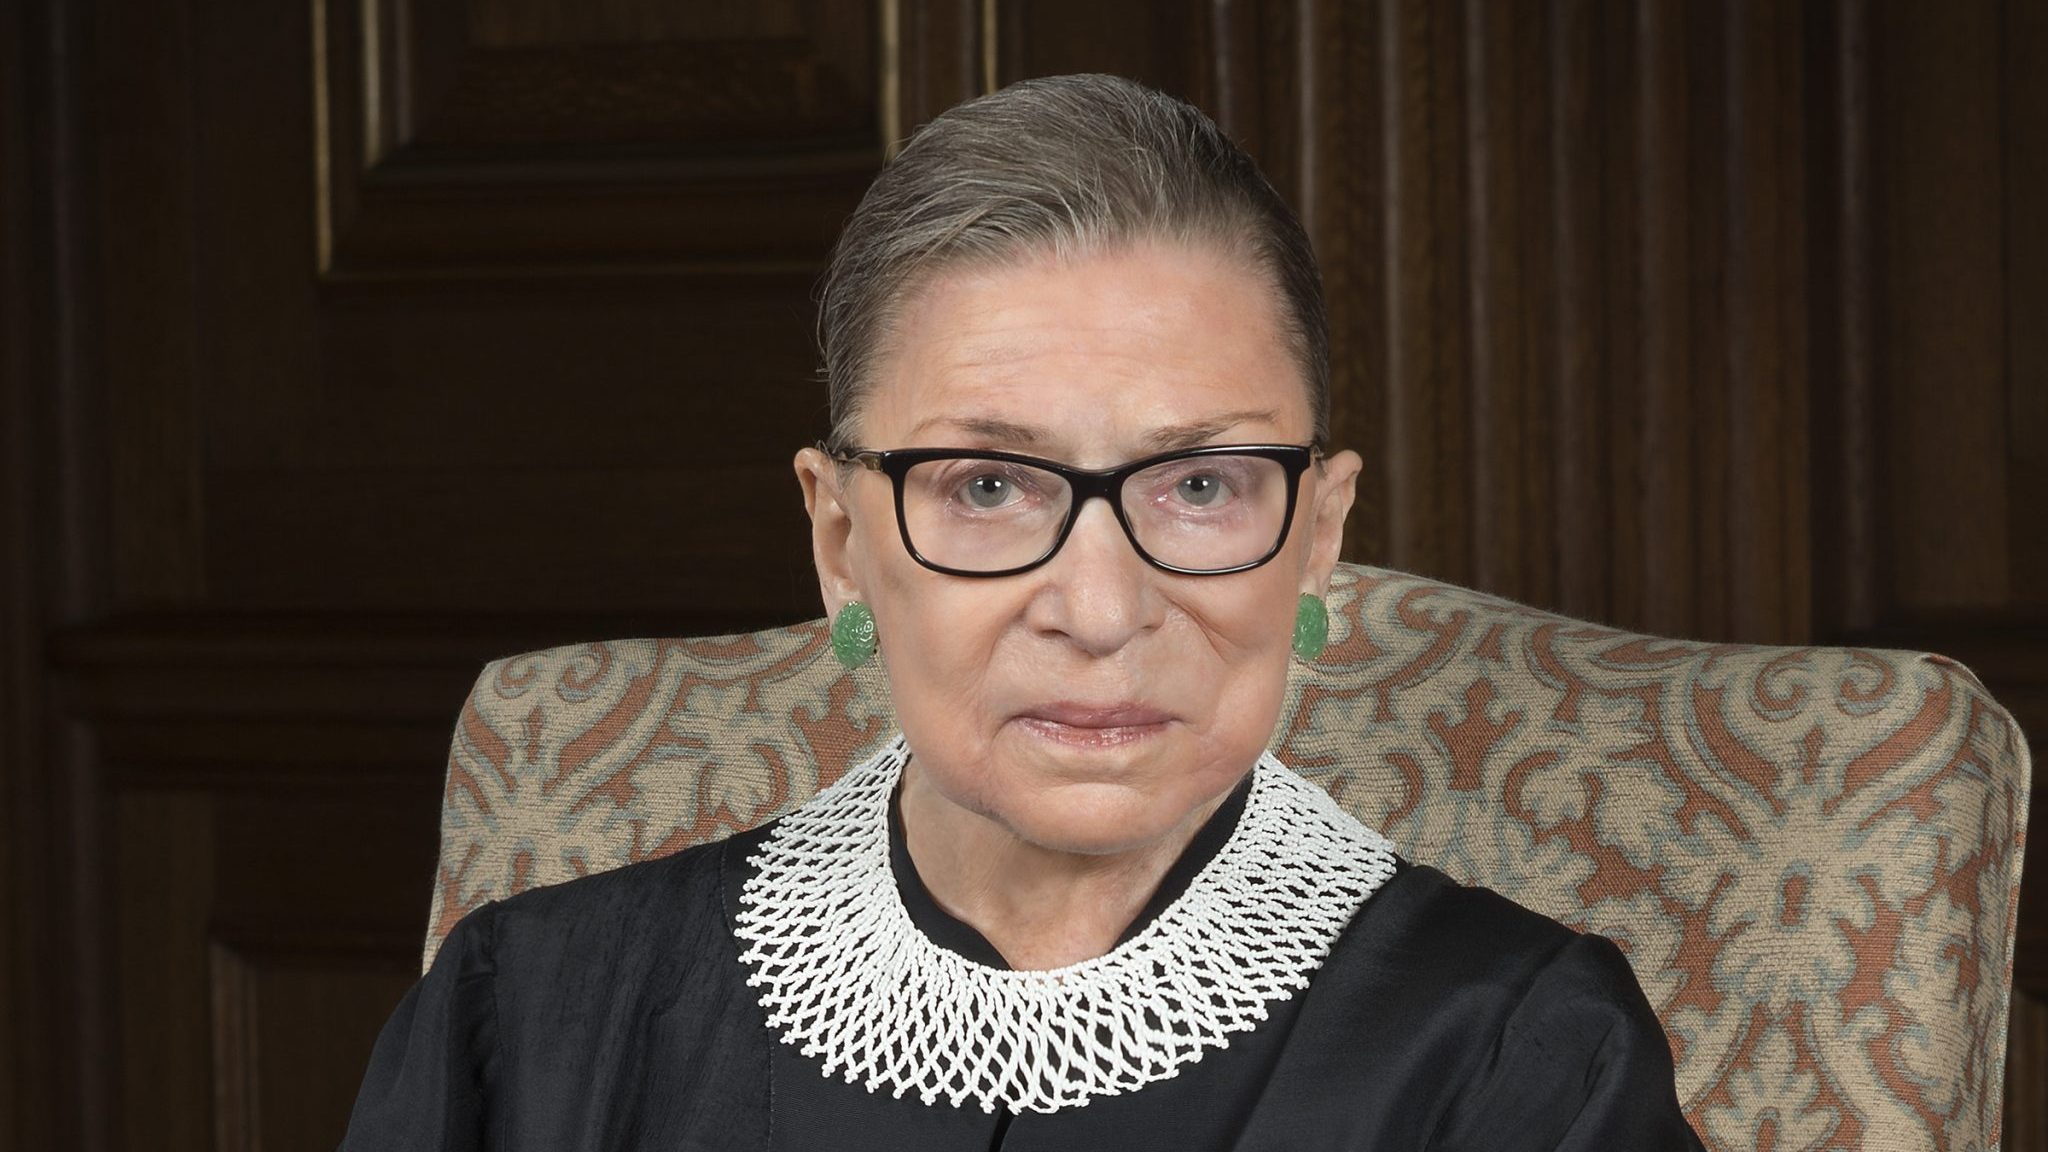 U.S. Supreme Court Justice Ruth Bader Ginsburg, seated in her robe, 2016 portrait